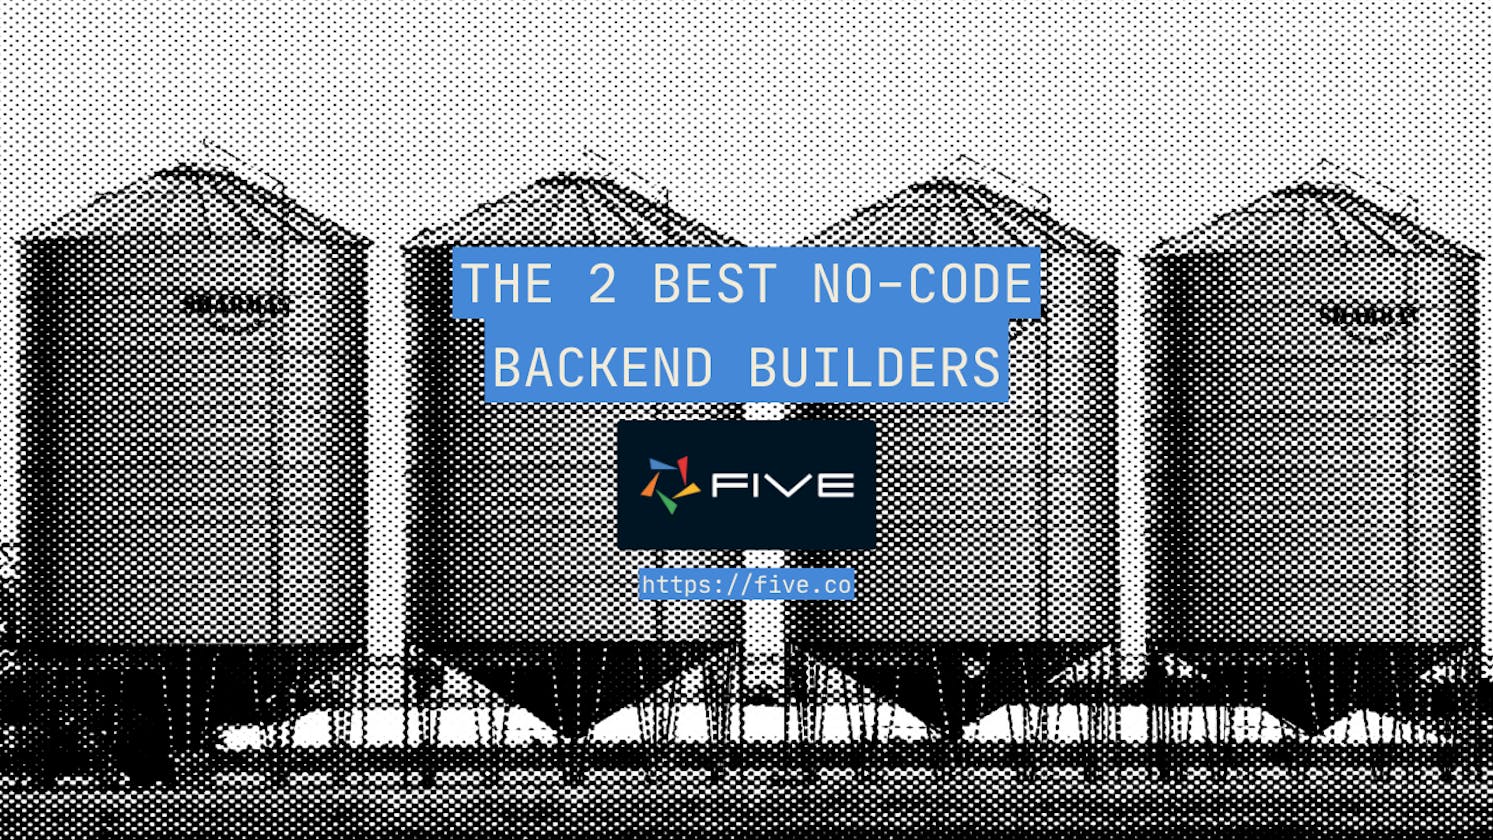 The 2 Best No-Code Backend Builders